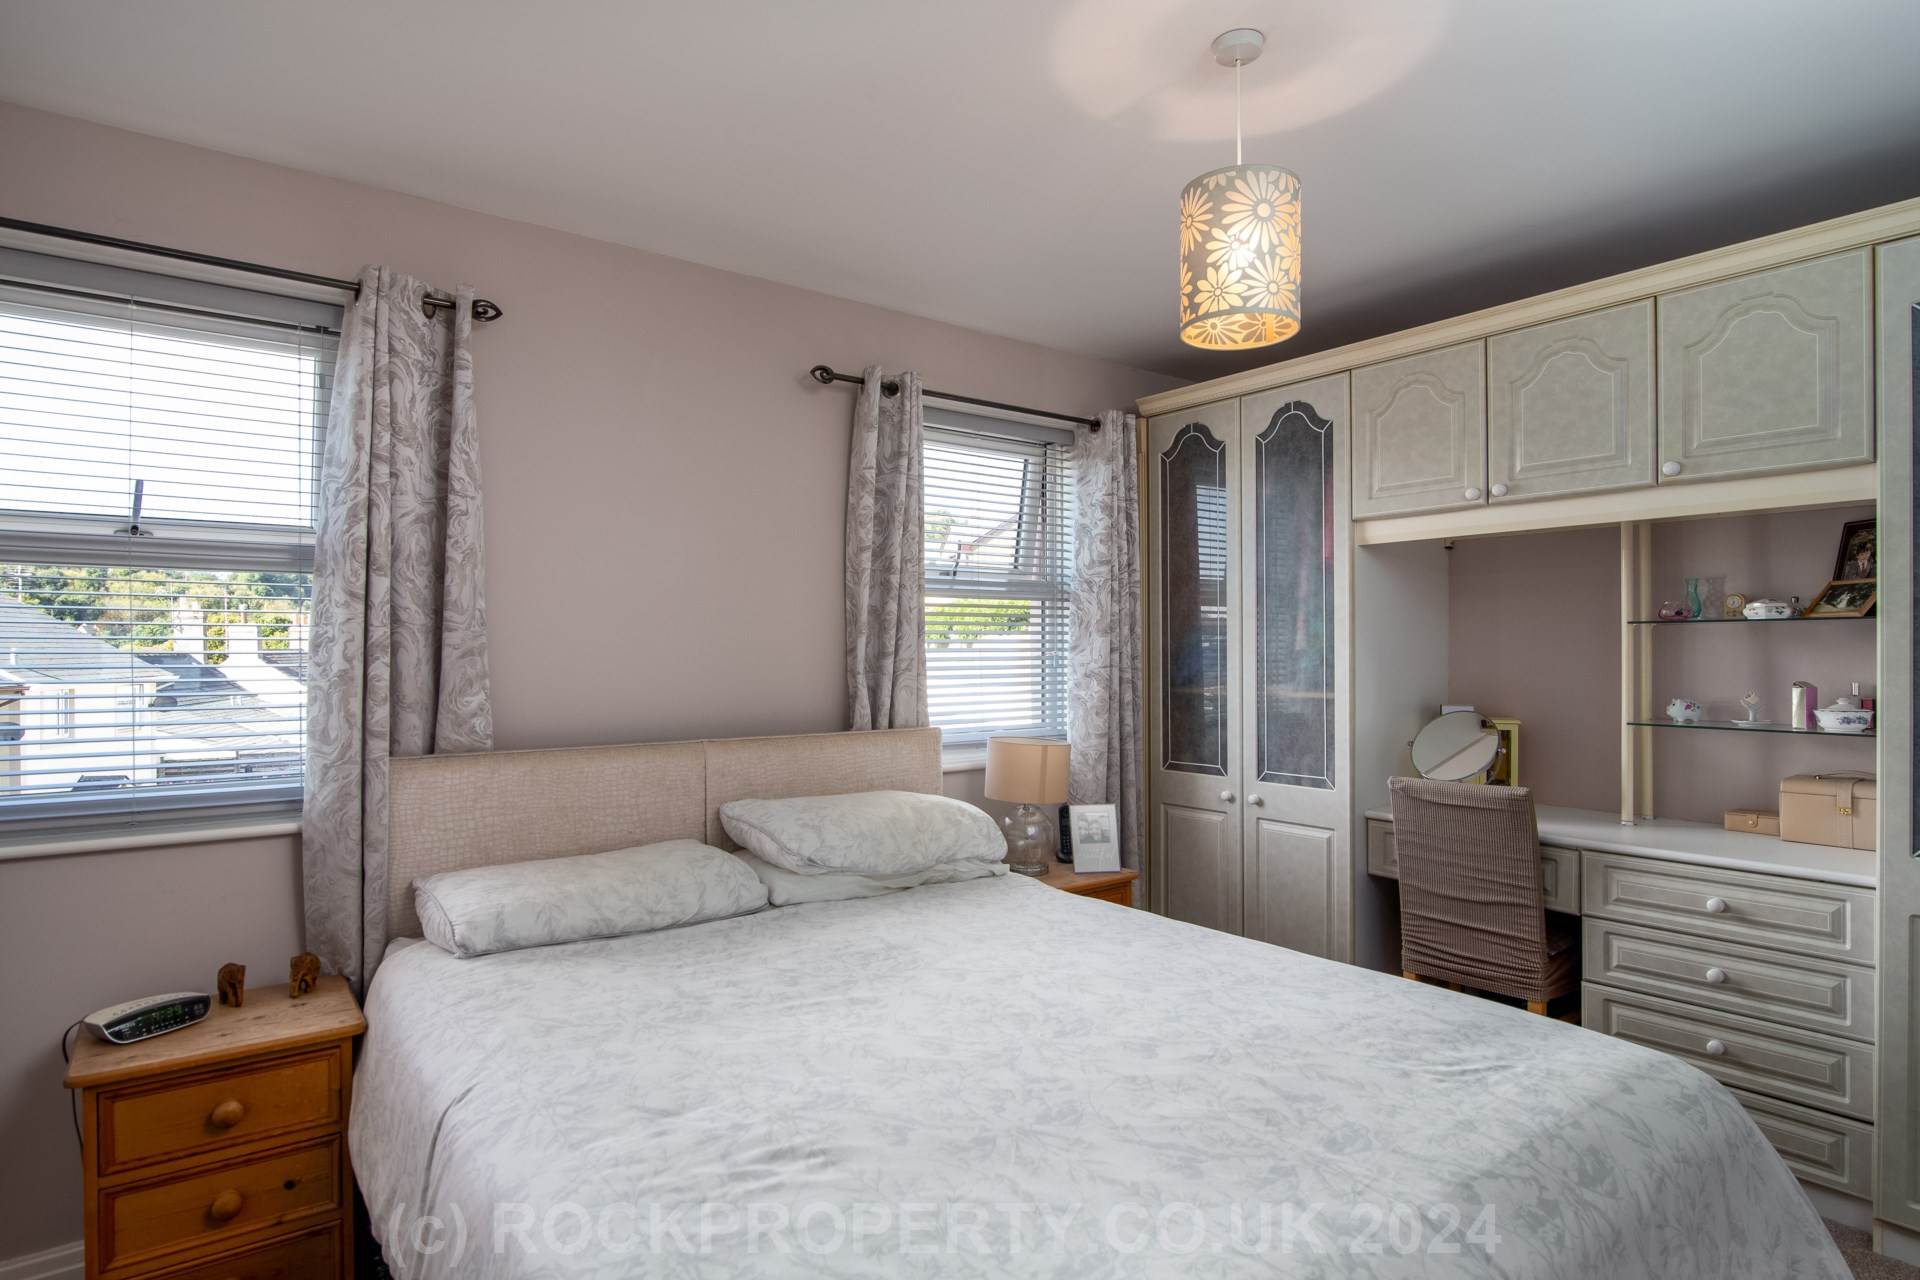 OFFERS INVITED - 2 BED HOUSE, Dunedin Farm, Outskirts of St Helier, Image 9